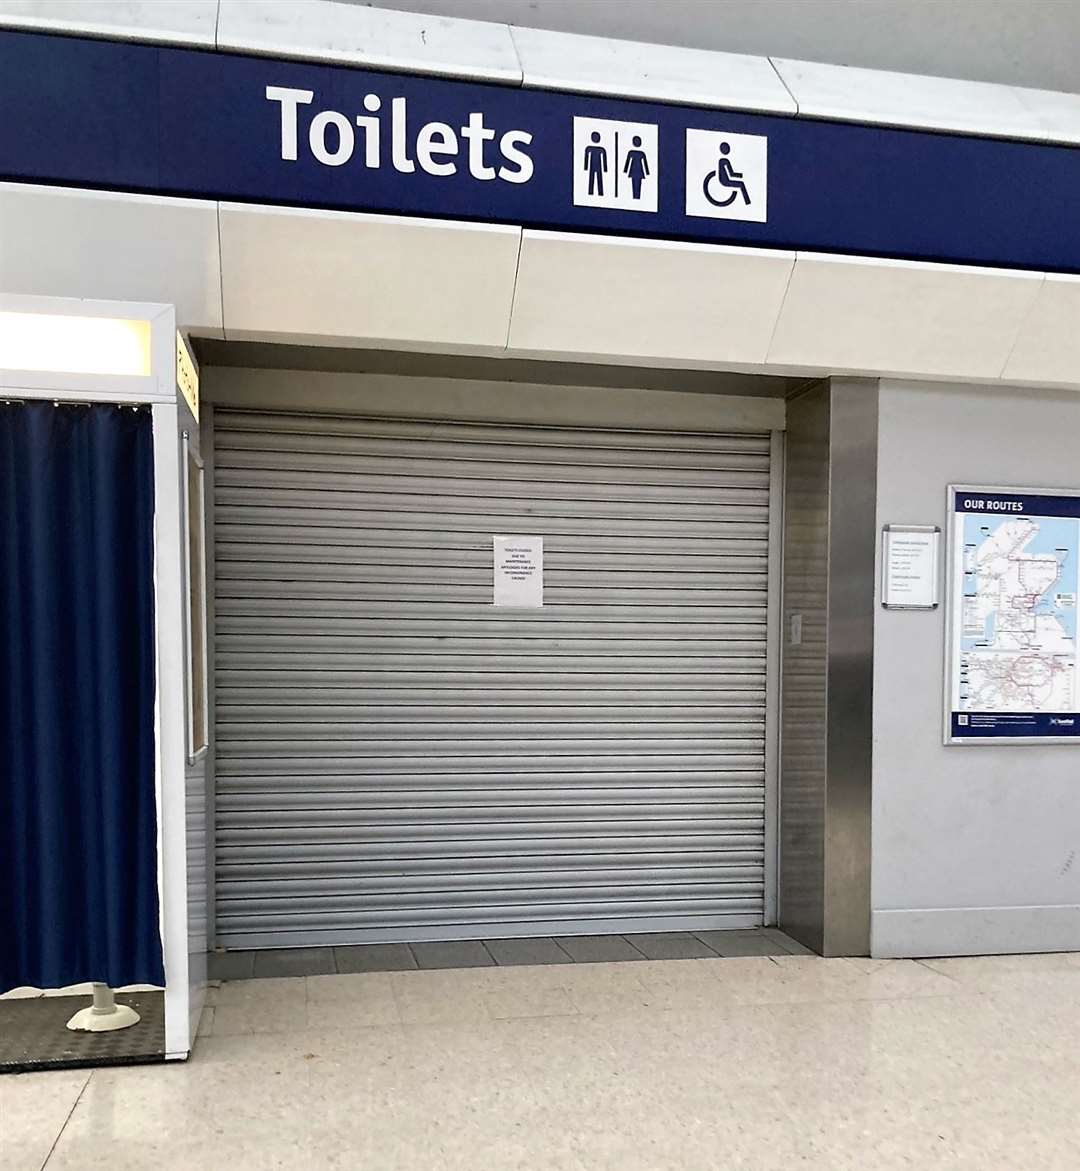 Inverness station's toilets were, however, closed when Louise went to check. Picture: Louise Smith